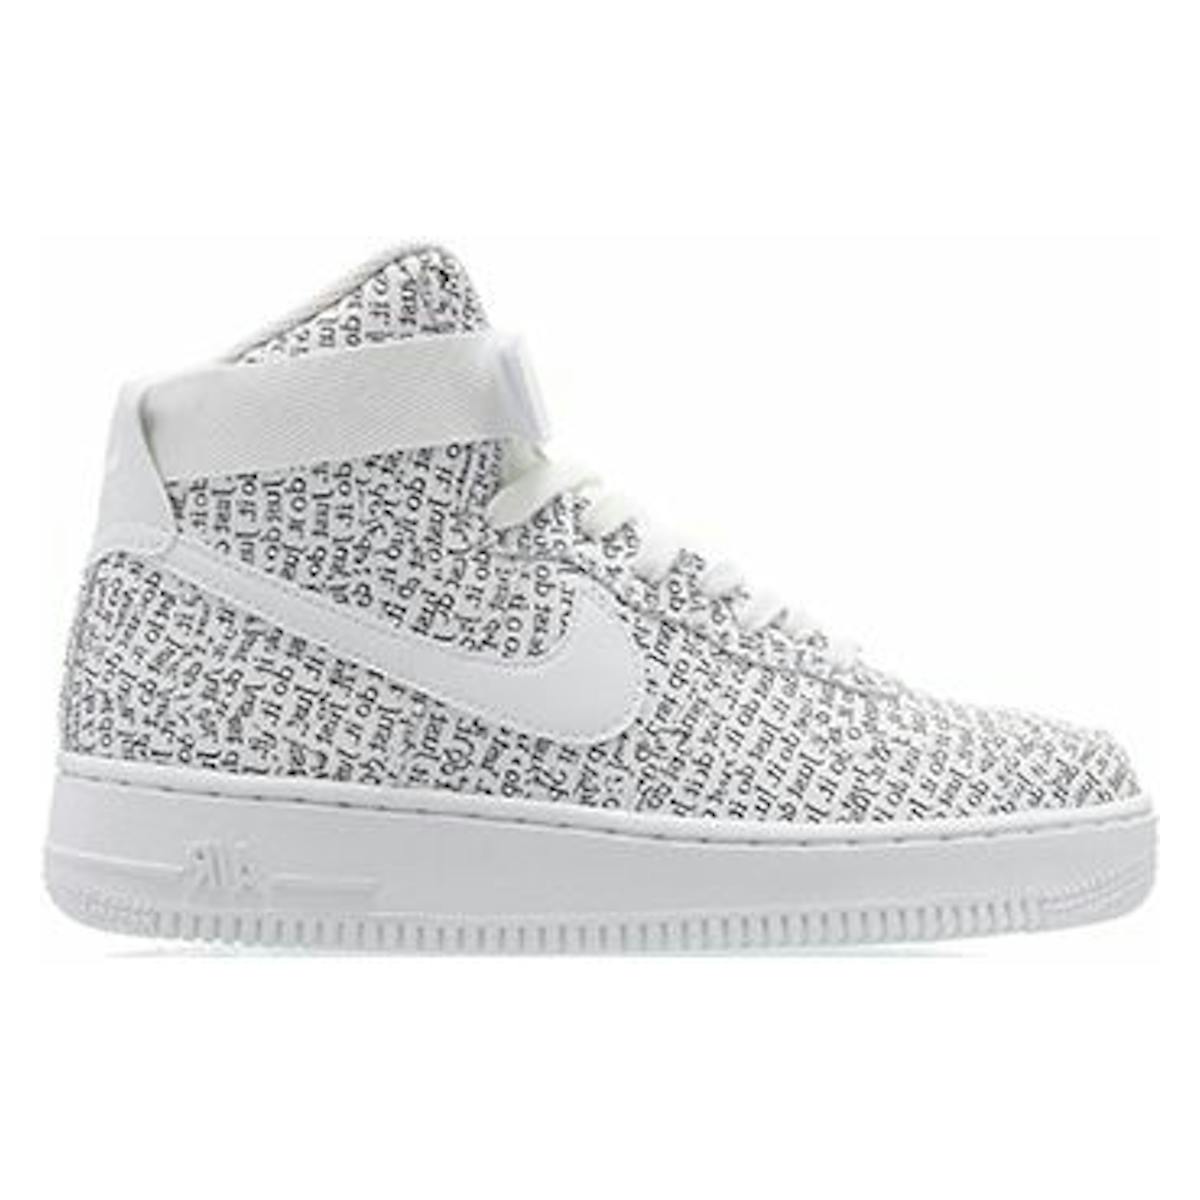 Nike WMNS Air Force 1 Hi LX "Just Do It" White